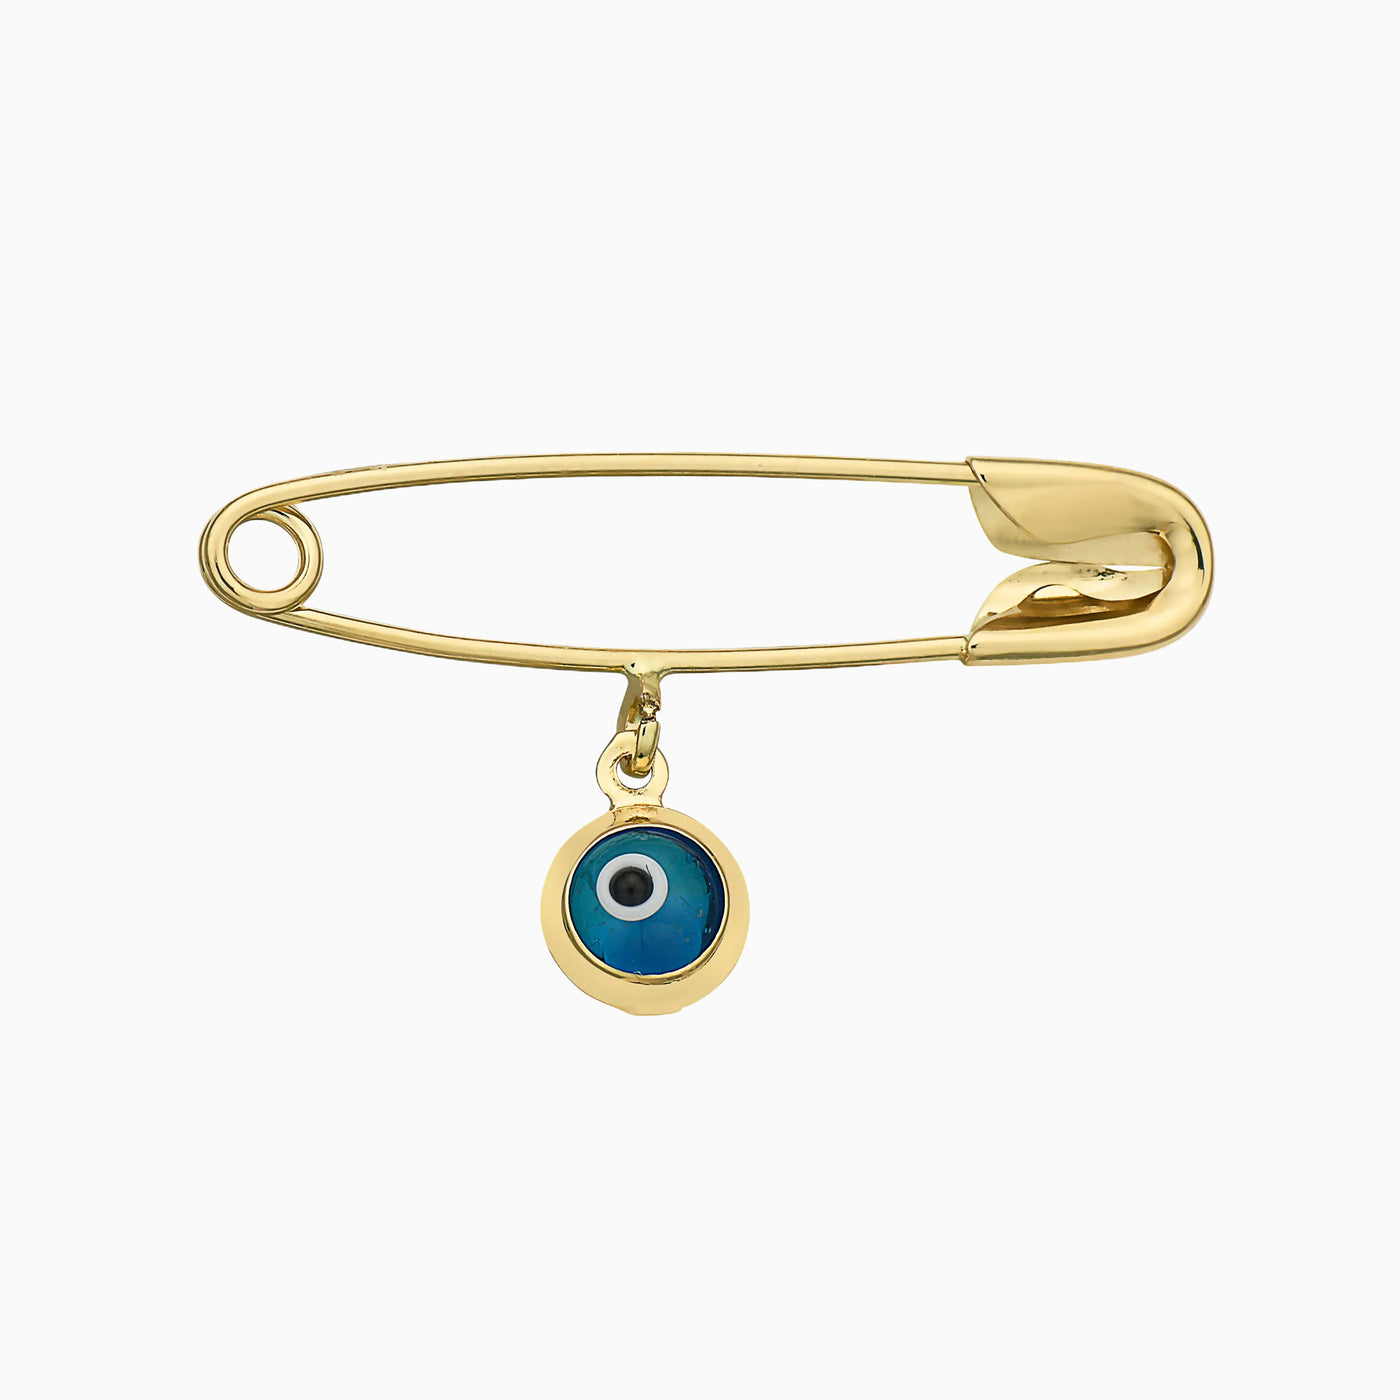 14K Gold Paperclip with Dangling Evil Eye Versatile Pin Pendant or Earring